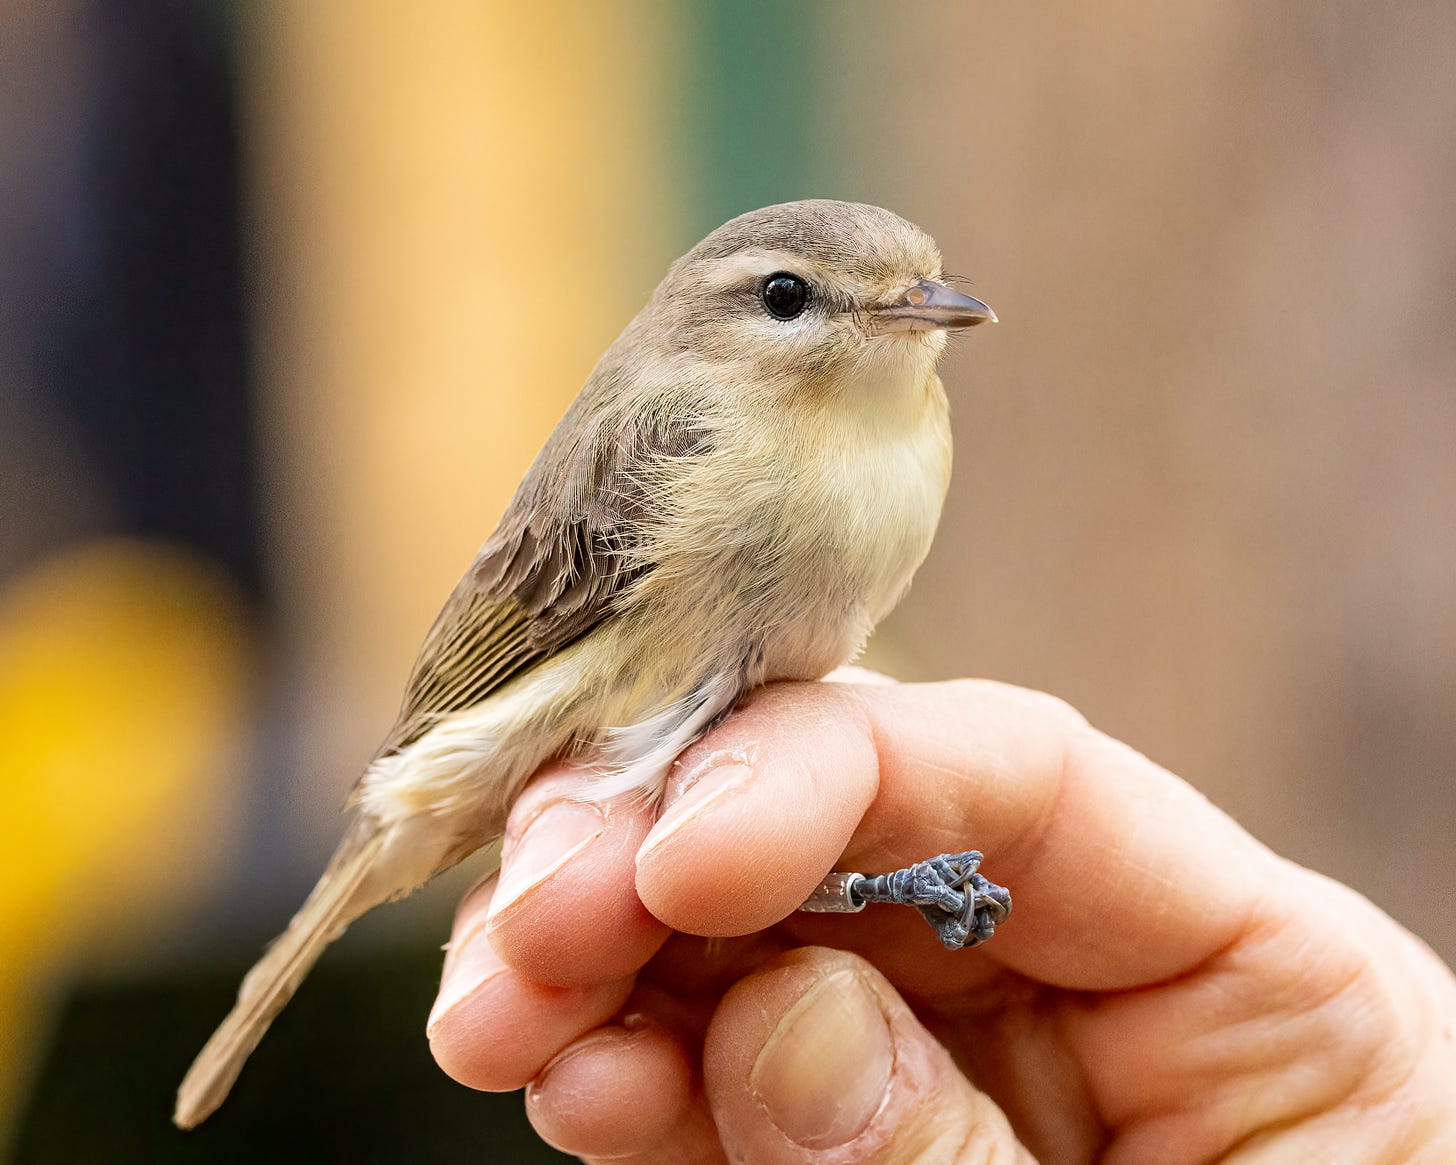 In this image, a human hand holds a warbling vireo, a rather drab gray bird with a faint cream-colored eye stripe.